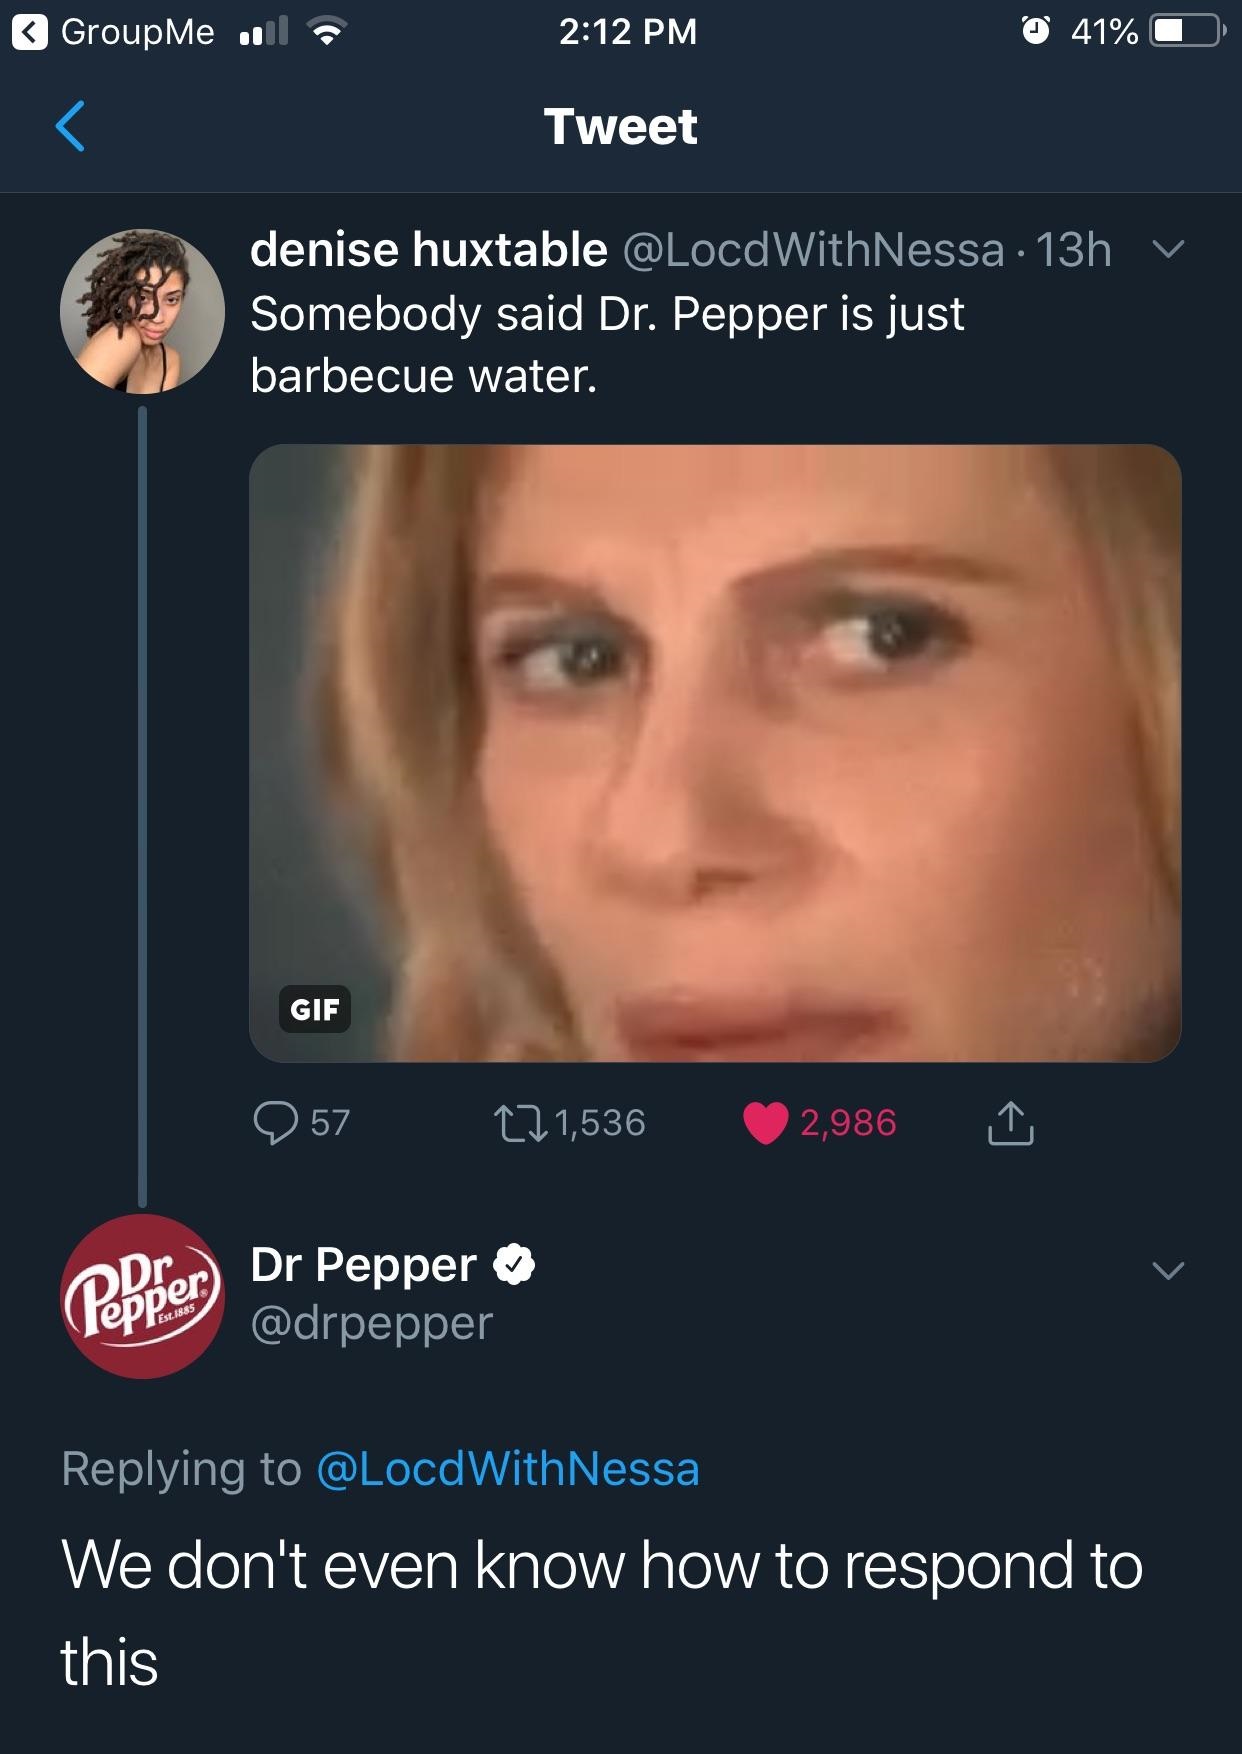 dr pepper is just barbecue water meme - GroupMe olla 41% 0 Tweet denise huxtable 13h v Somebody said Dr. Pepper is just barbecue water. Gif 57 221,536 2,986 Popper Dr Pepper Est.1885 Nessa We don't even know how to respond to this